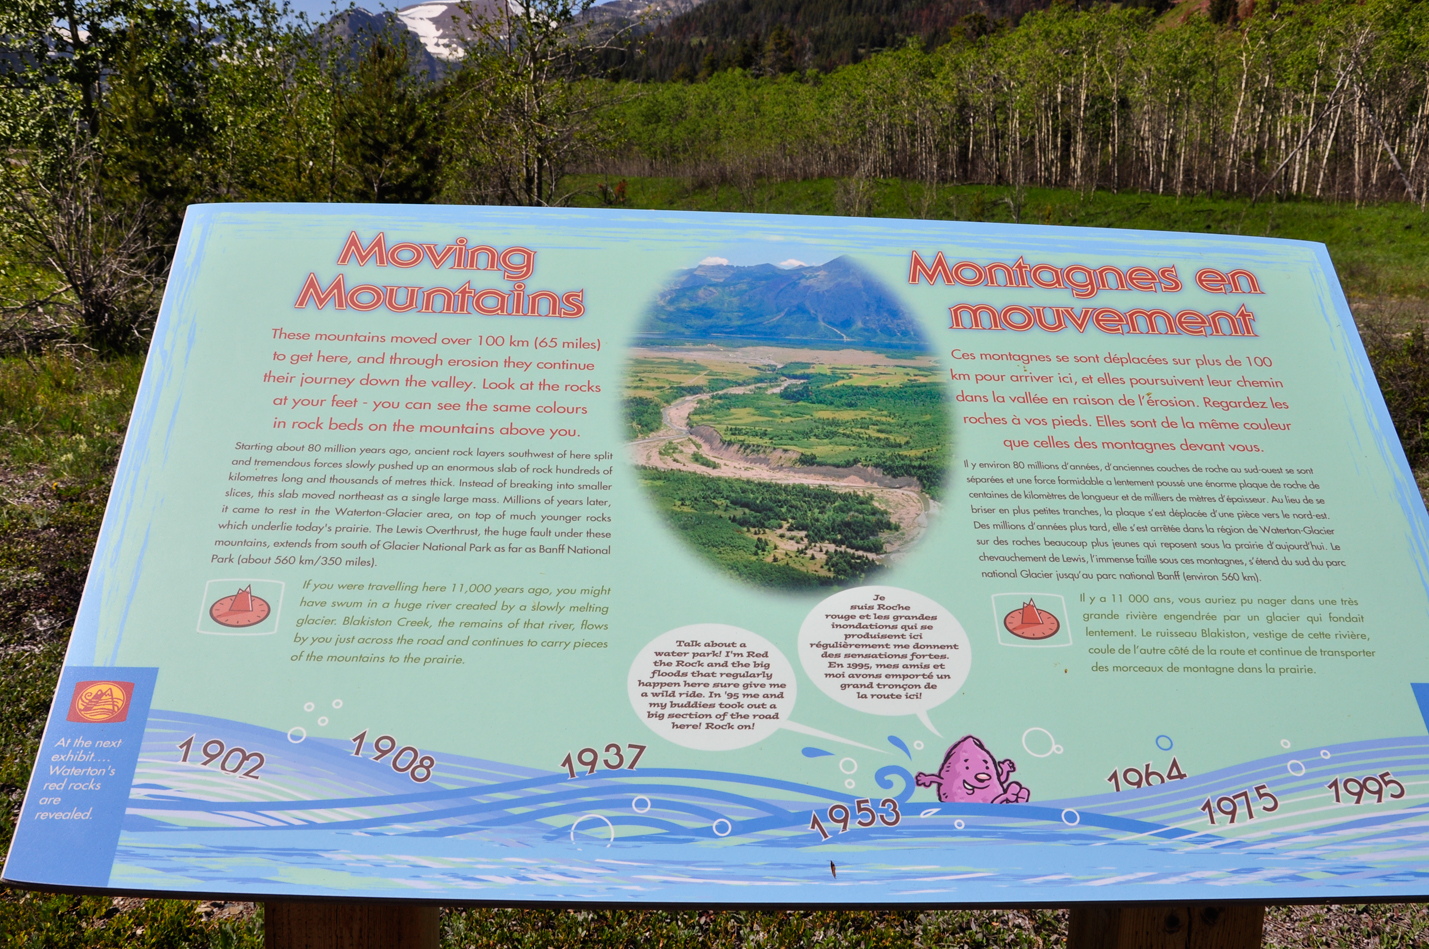 sign about the moving mountains